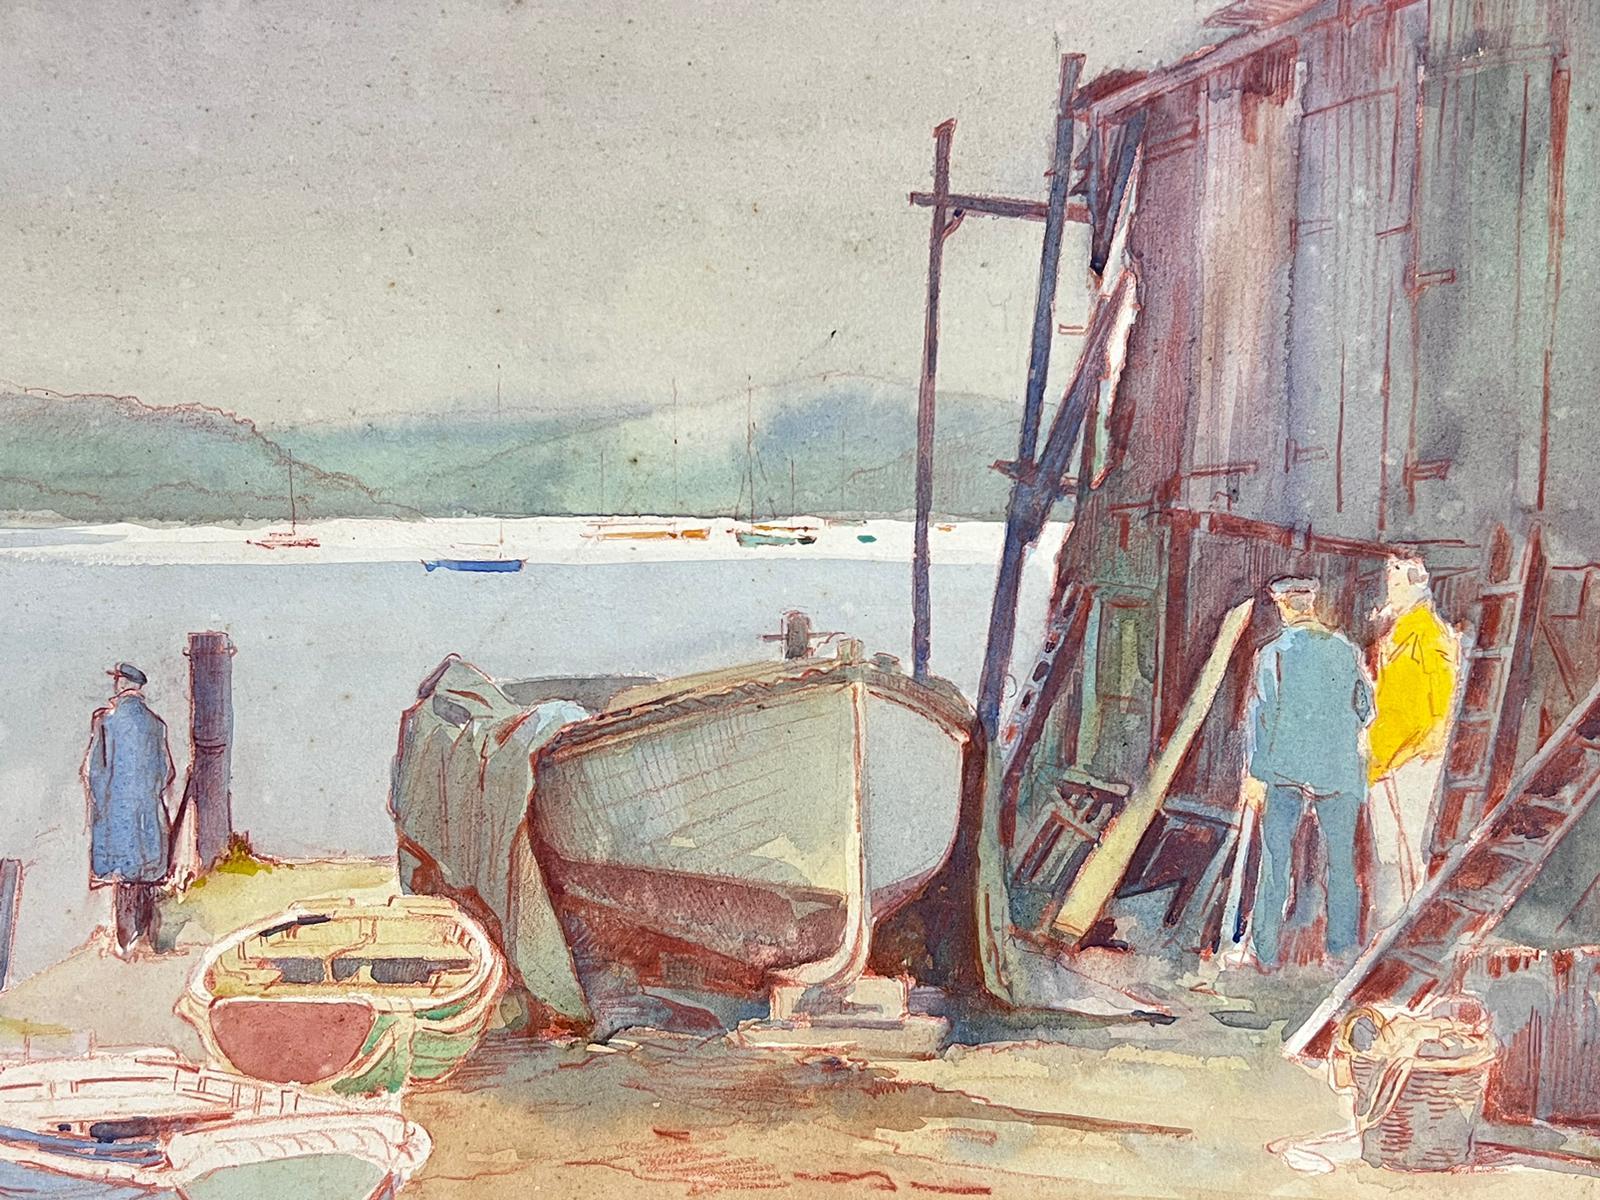 Frank Duffield (British, 1908-1982)
signed original gouache painting on board, unframed
size: 14 x 17 inches
condition: overall very good, minor wear to the edges as is normal for an unframed work, minor staining from age/ light to the